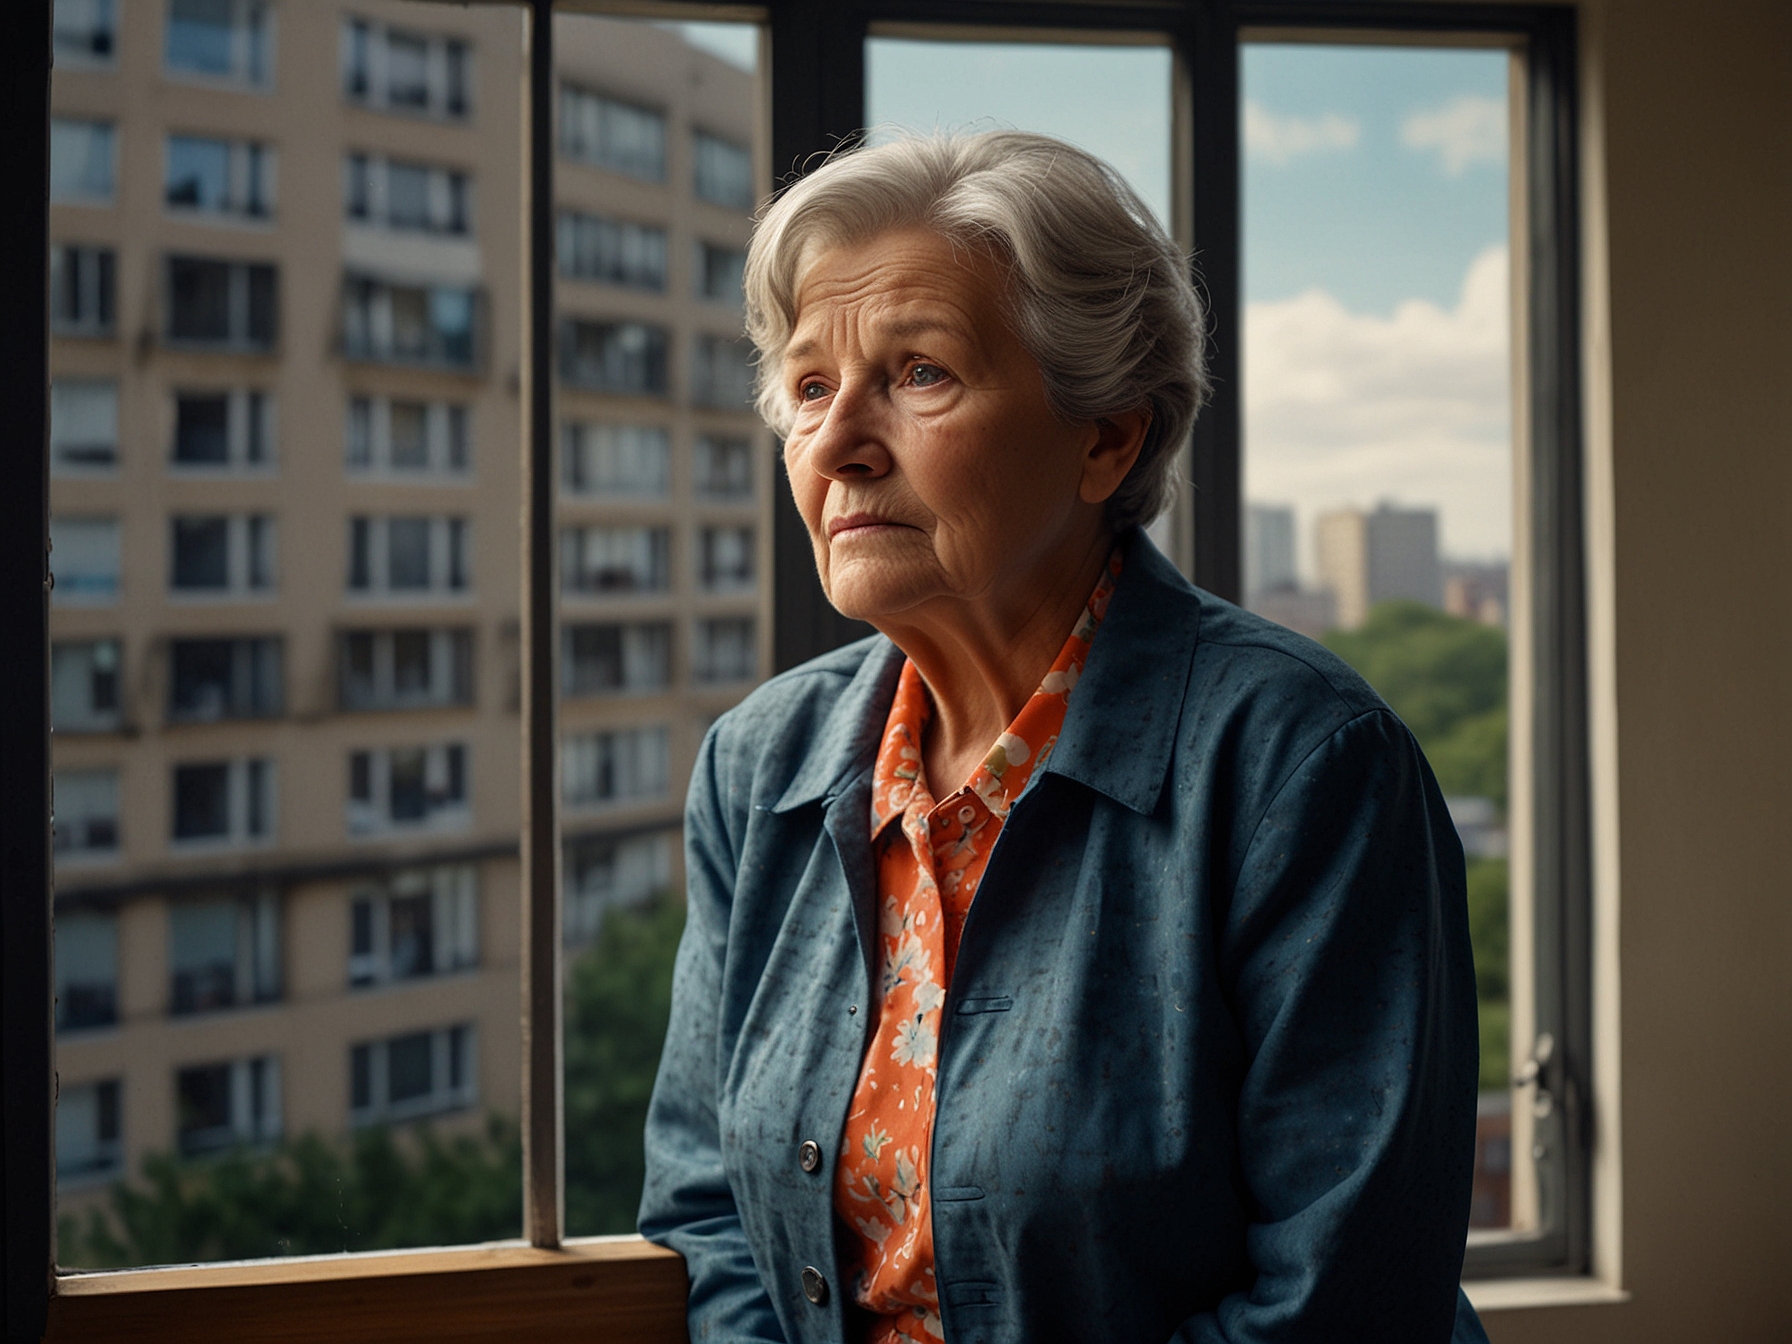 An elderly woman, Alice Johnson, stands by her window in the 15-storey tower block, looking out with a mix of worry and sadness. She has lived here for 45 years and is anxious about finding new housing.